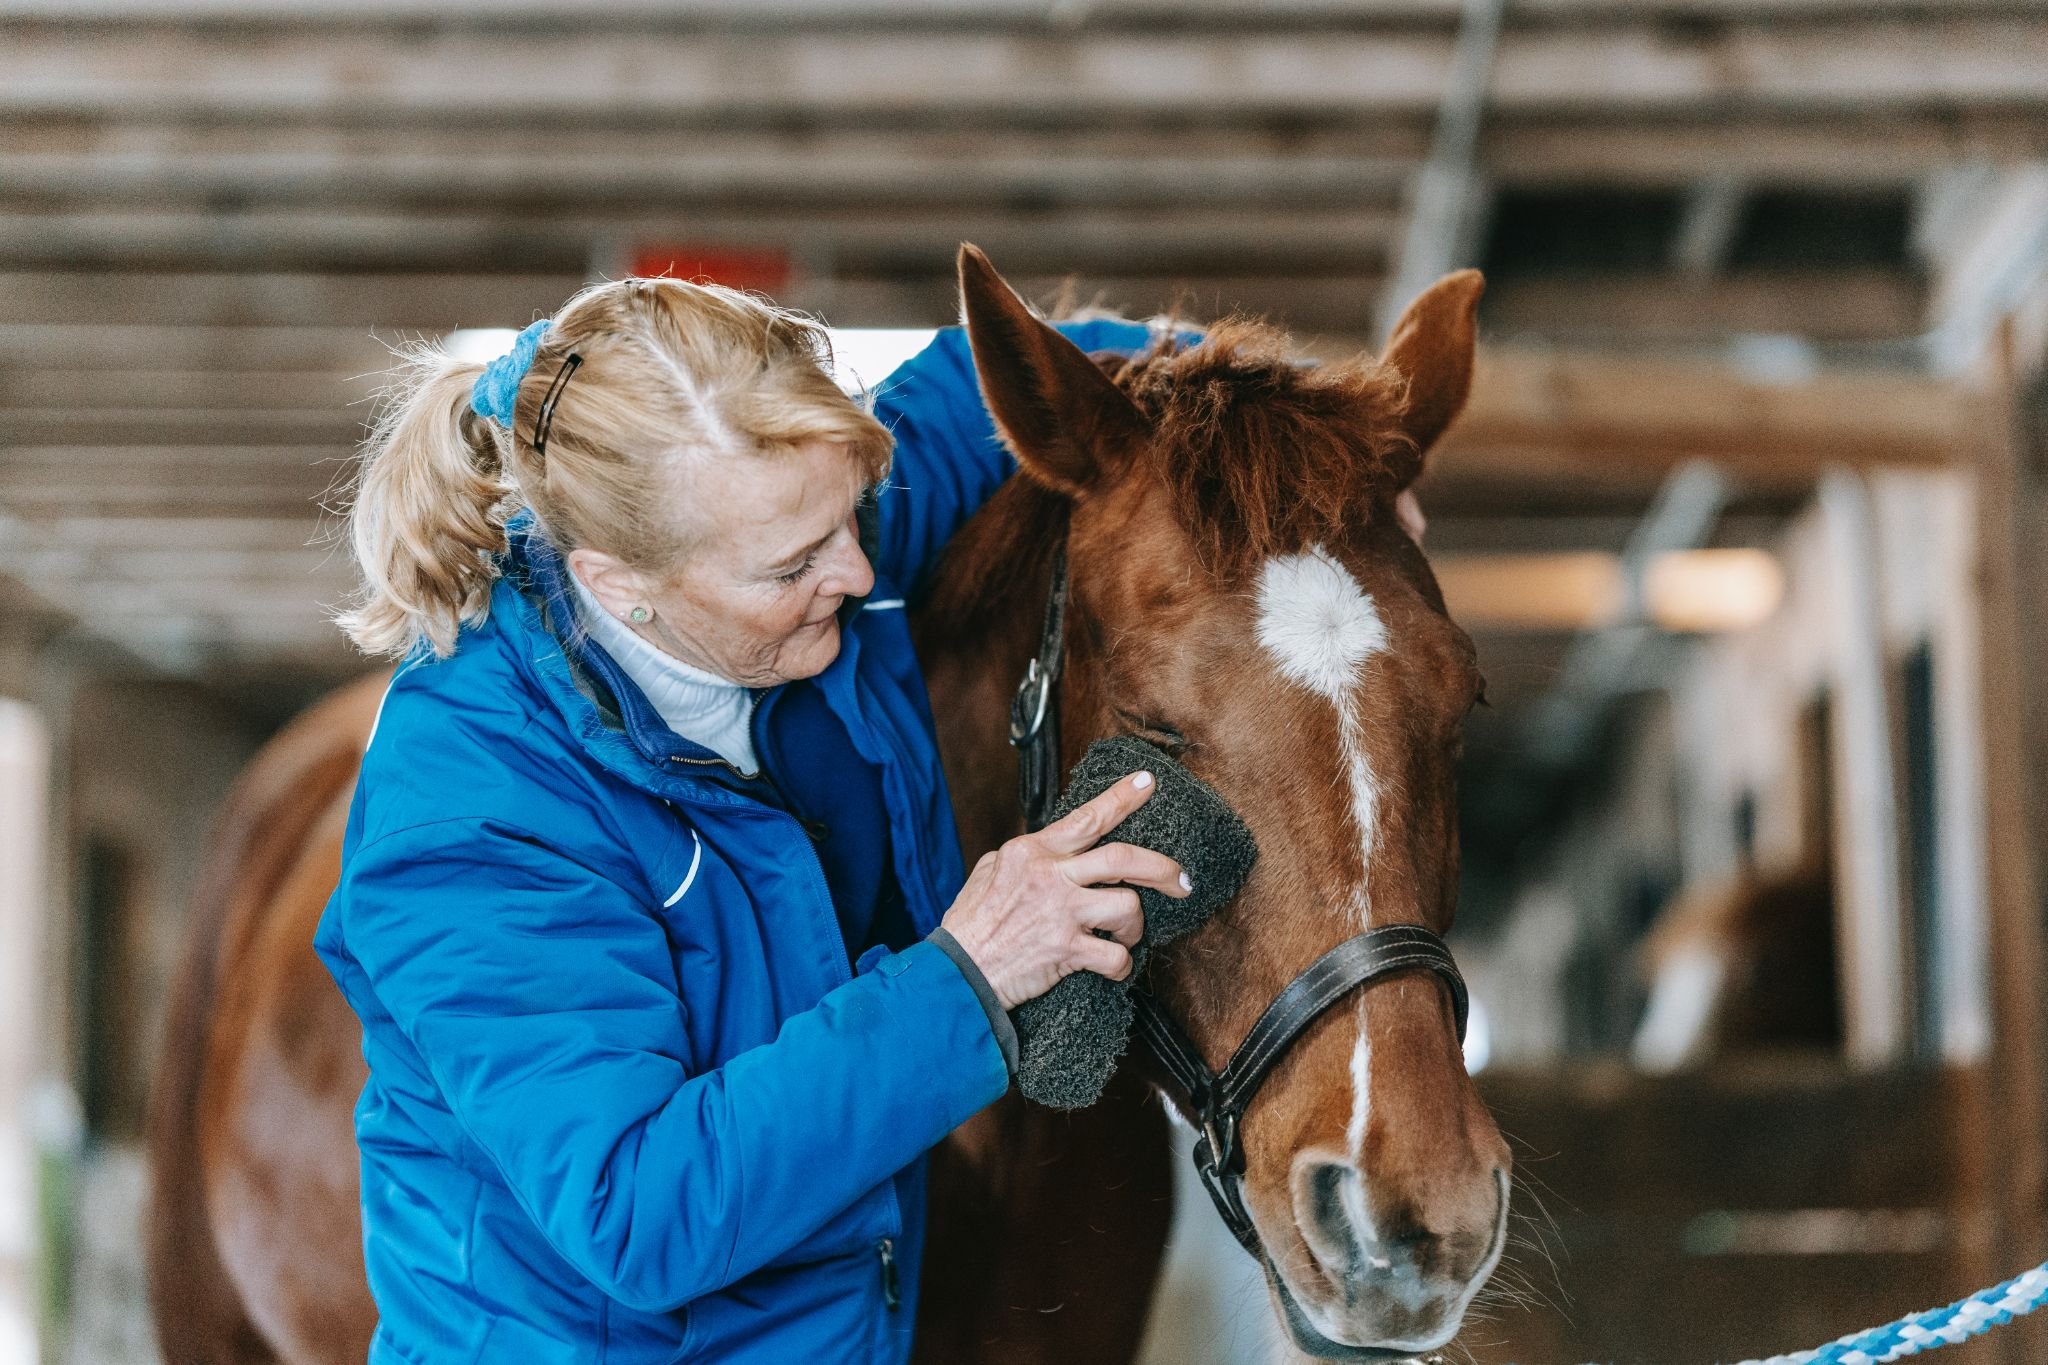 A lady cleaning a horse's eye with a sponge